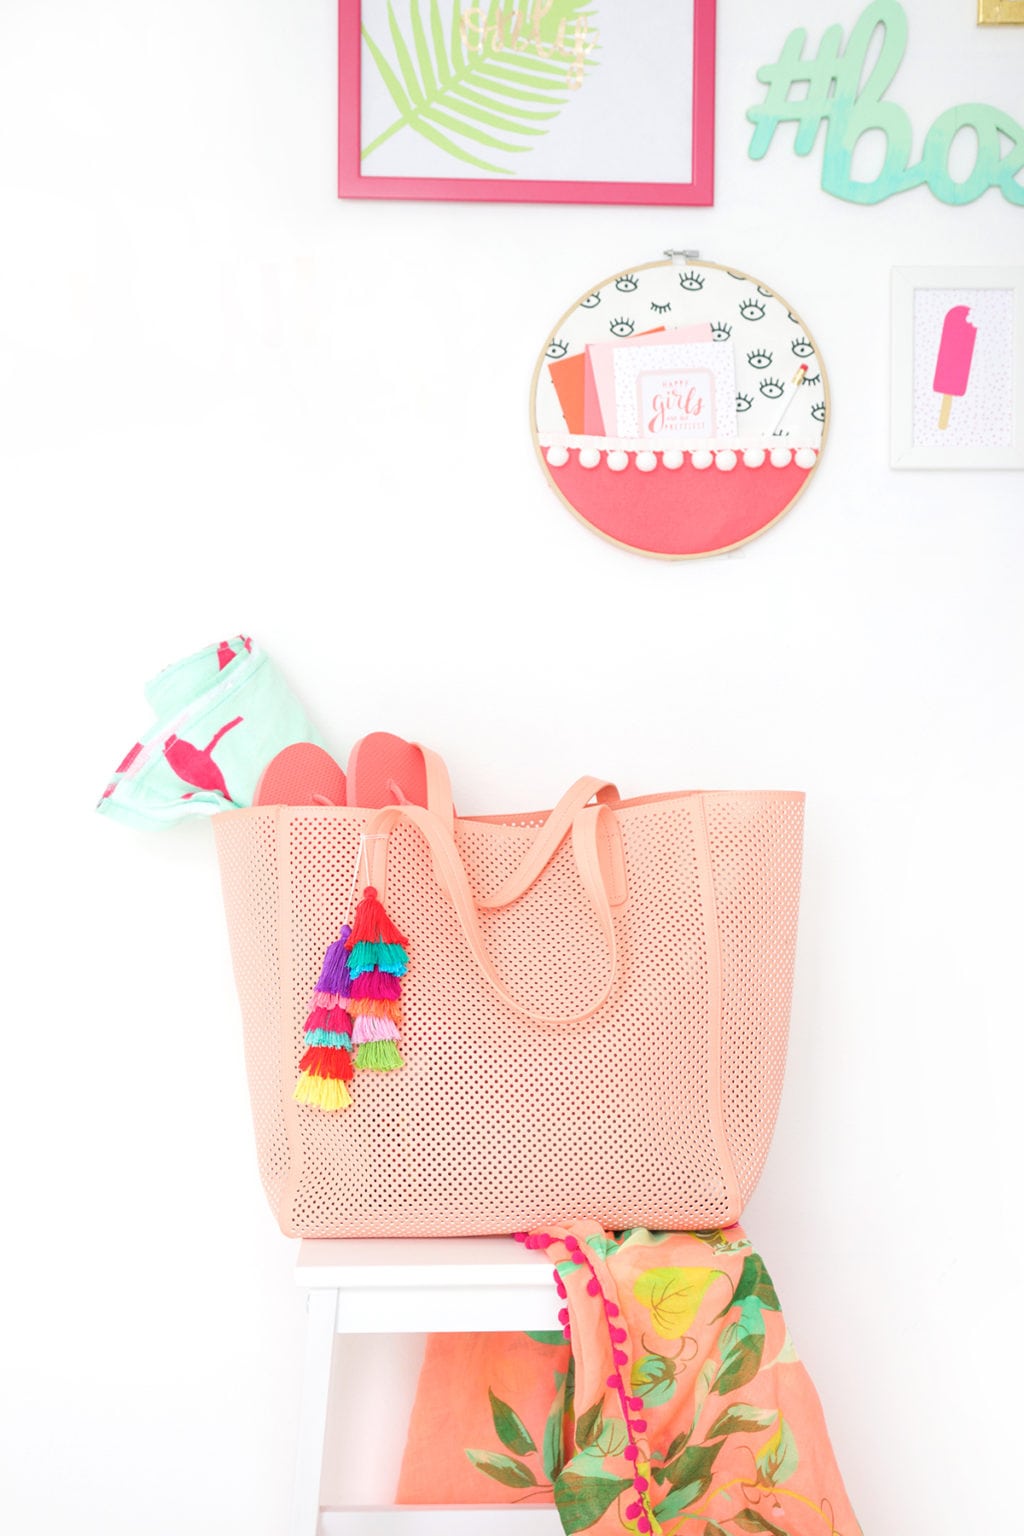 Use embroidery floss to create bold DIY tiered tassels for your beach tote.